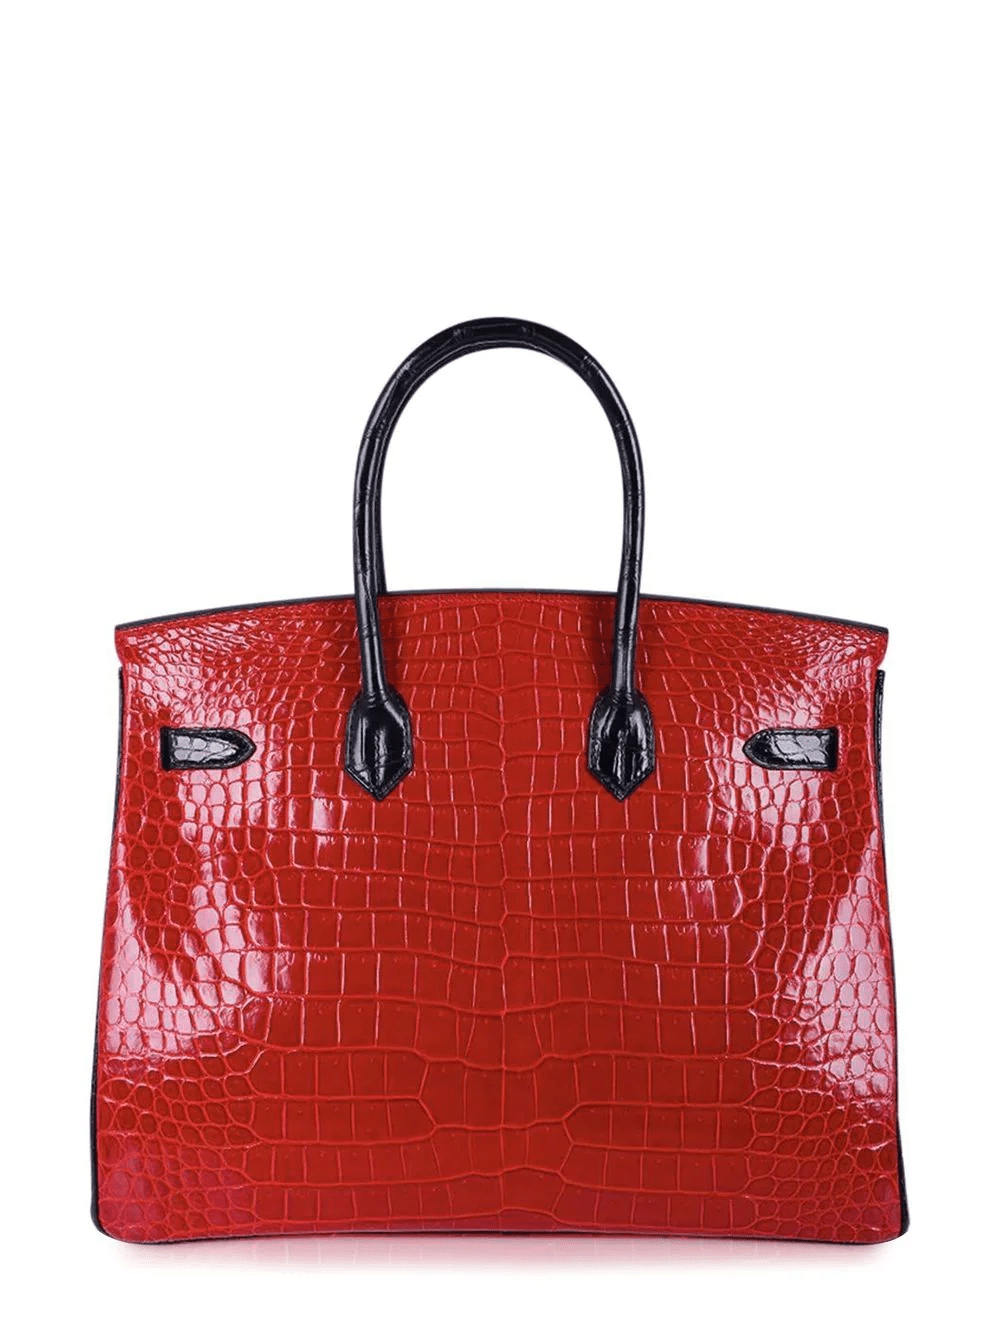 8 Affordable Birkin Bag Dupes and Look-Alikes You Can Buy Online